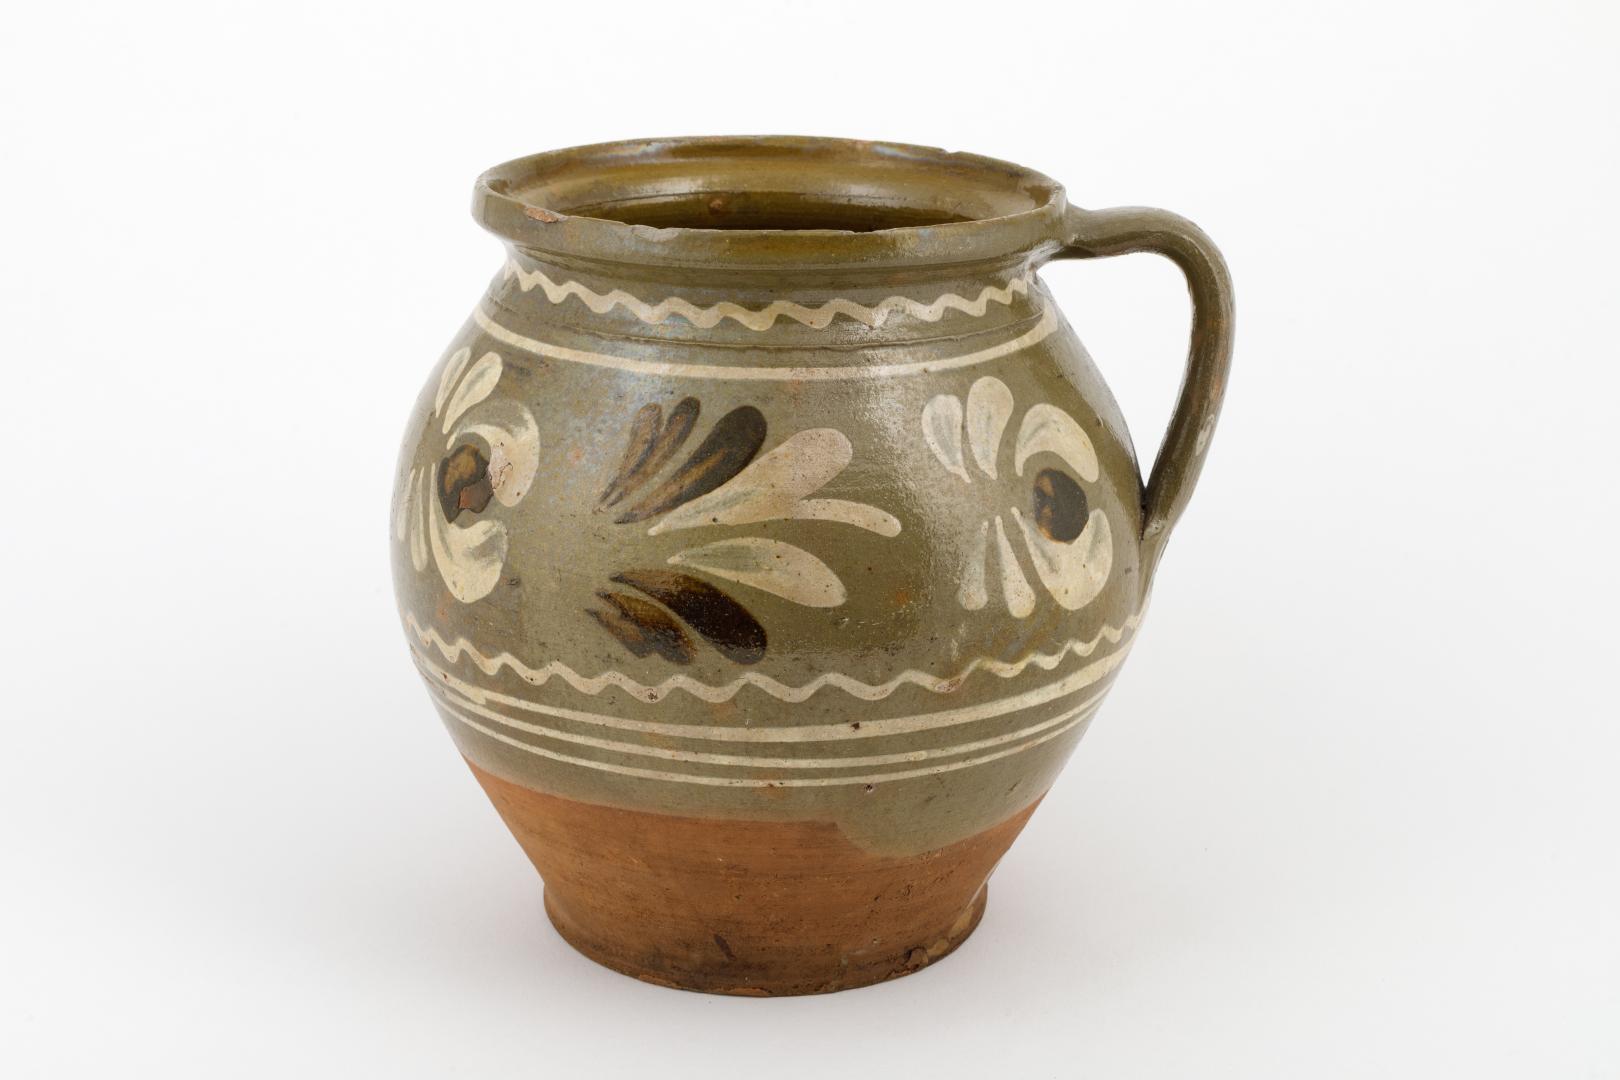 Pot with a handle